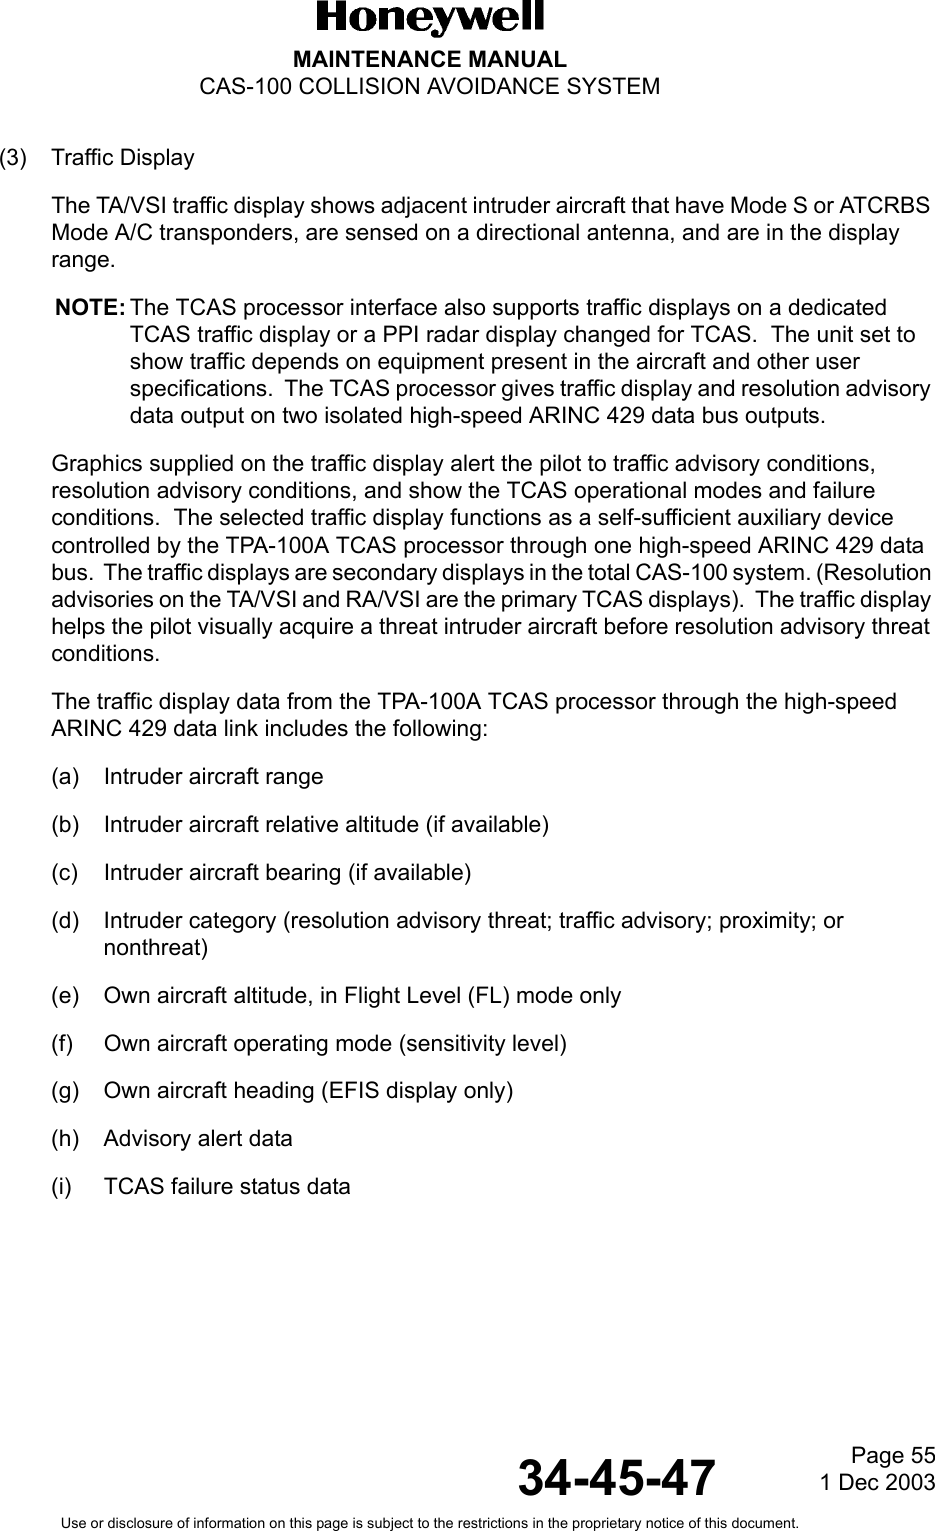 Page 551 Dec 200334-45-47MAINTENANCE MANUALCAS-100 COLLISION AVOIDANCE SYSTEMUse or disclosure of information on this page is subject to the restrictions in the proprietary notice of this document.(3) Traffic DisplayThe TA/VSI traffic display shows adjacent intruder aircraft that have Mode S or ATCRBS Mode A/C transponders, are sensed on a directional antenna, and are in the display range.NOTE: The TCAS processor interface also supports traffic displays on a dedicated TCAS traffic display or a PPI radar display changed for TCAS.  The unit set to show traffic depends on equipment present in the aircraft and other user specifications.  The TCAS processor gives traffic display and resolution advisory data output on two isolated high-speed ARINC 429 data bus outputs.Graphics supplied on the traffic display alert the pilot to traffic advisory conditions, resolution advisory conditions, and show the TCAS operational modes and failure conditions.  The selected traffic display functions as a self-sufficient auxiliary device controlled by the TPA-100A TCAS processor through one high-speed ARINC 429 data bus.  The traffic displays are secondary displays in the total CAS-100 system. (Resolution advisories on the TA/VSI and RA/VSI are the primary TCAS displays).  The traffic display helps the pilot visually acquire a threat intruder aircraft before resolution advisory threat conditions.The traffic display data from the TPA-100A TCAS processor through the high-speed ARINC 429 data link includes the following:(a) Intruder aircraft range(b) Intruder aircraft relative altitude (if available)(c) Intruder aircraft bearing (if available)(d) Intruder category (resolution advisory threat; traffic advisory; proximity; or nonthreat)(e) Own aircraft altitude, in Flight Level (FL) mode only(f) Own aircraft operating mode (sensitivity level)(g) Own aircraft heading (EFIS display only)(h) Advisory alert data(i) TCAS failure status data